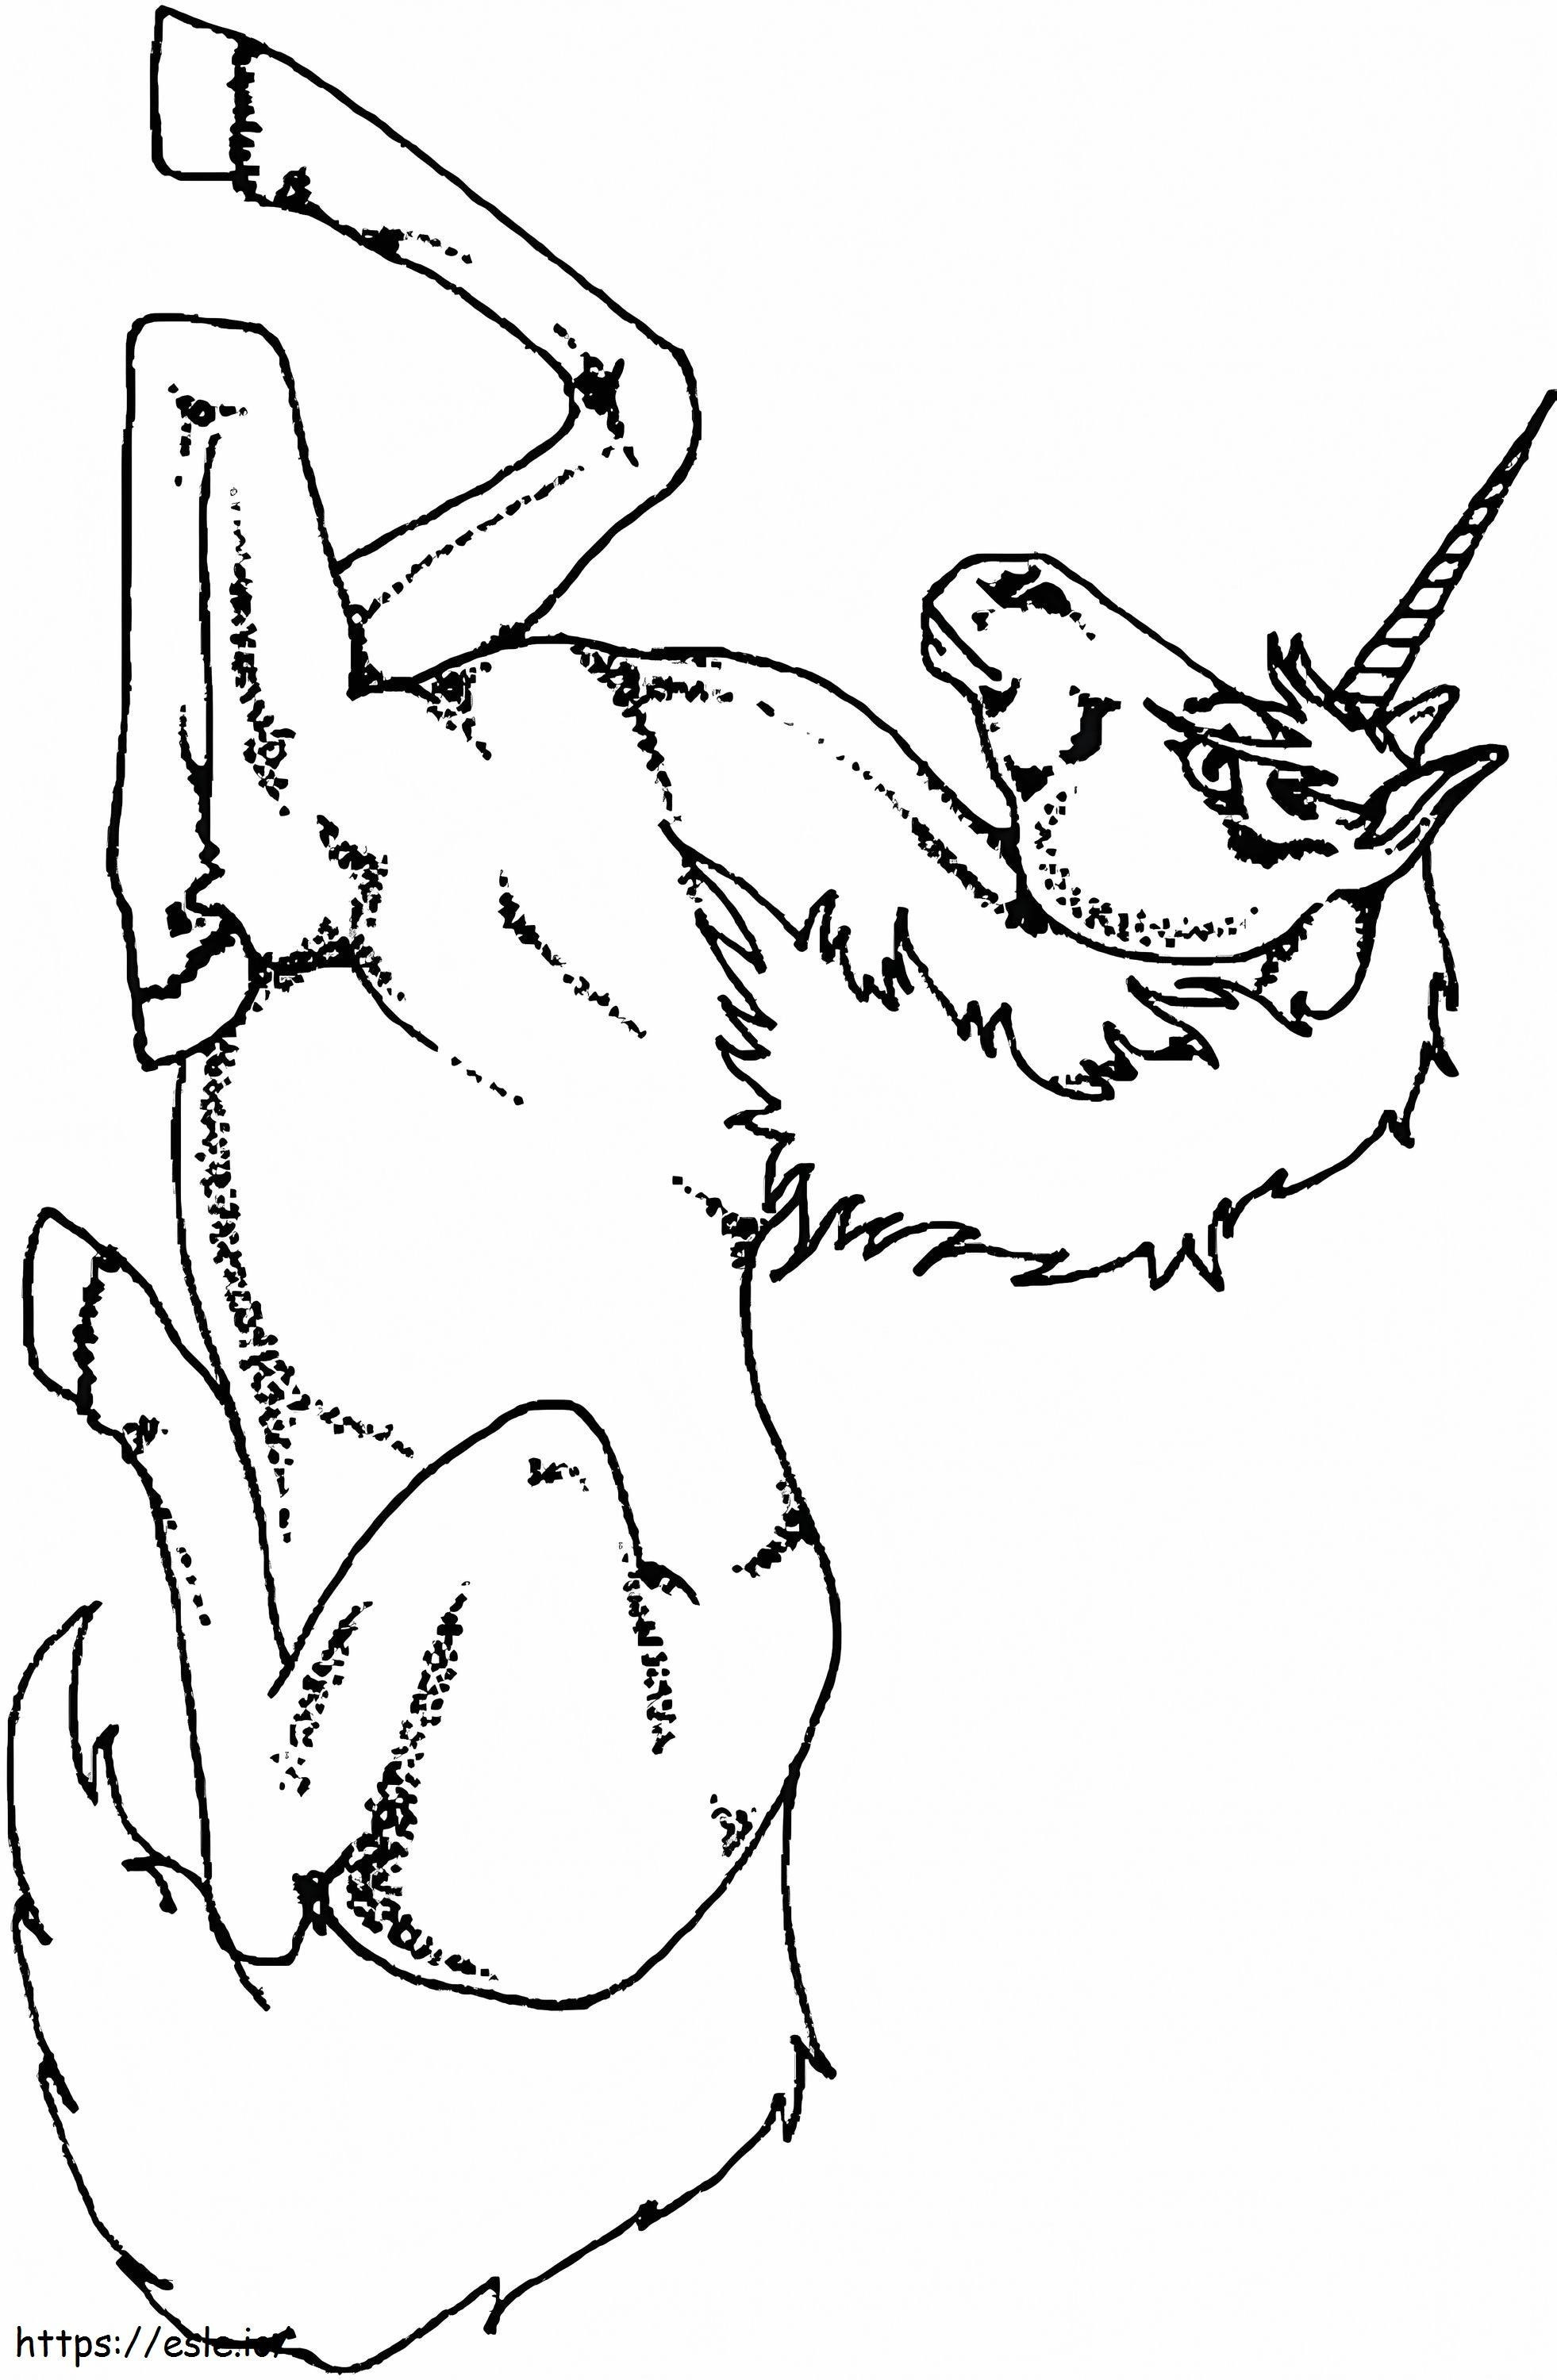 1563929864 Unicorn Sat Down A4 coloring page